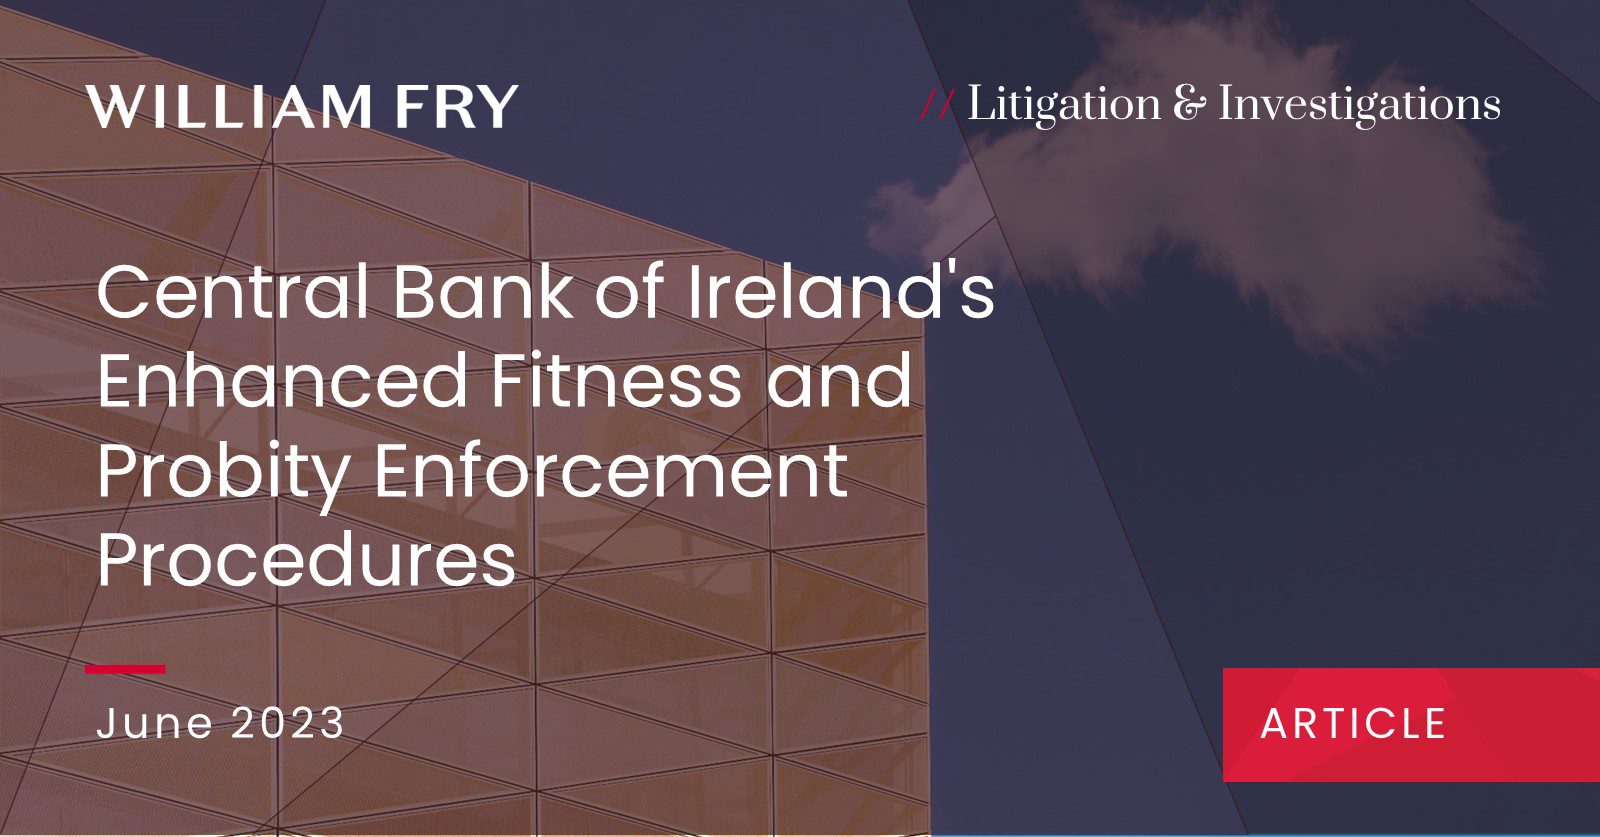 Central Bank of Ireland's Enhanced Fitness and Probity Enforcement Procedures